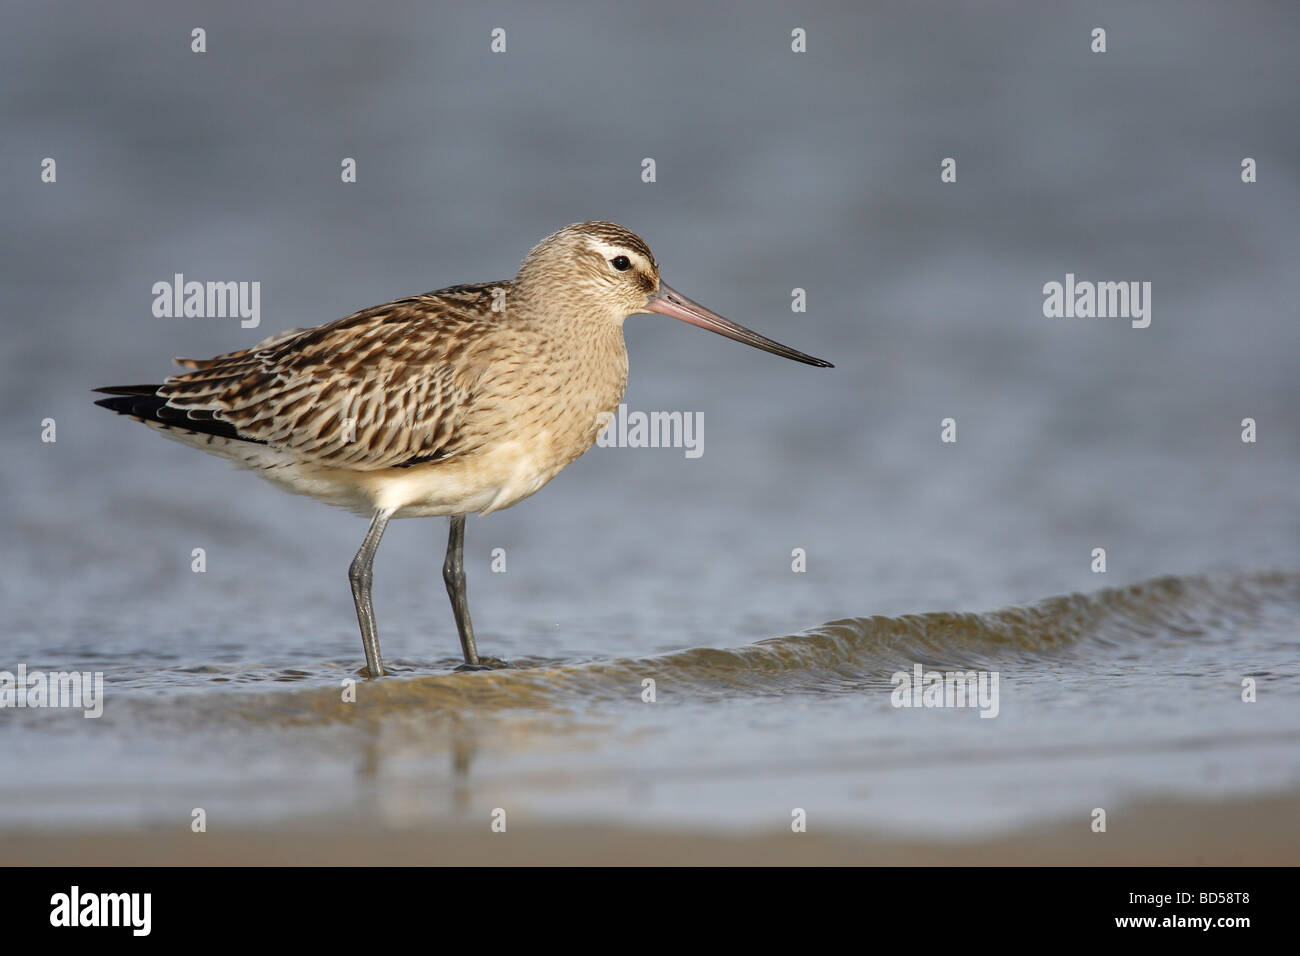 Black-tailed Godwit (Limosa limosa), juvenile standing in shallow water Stock Photo